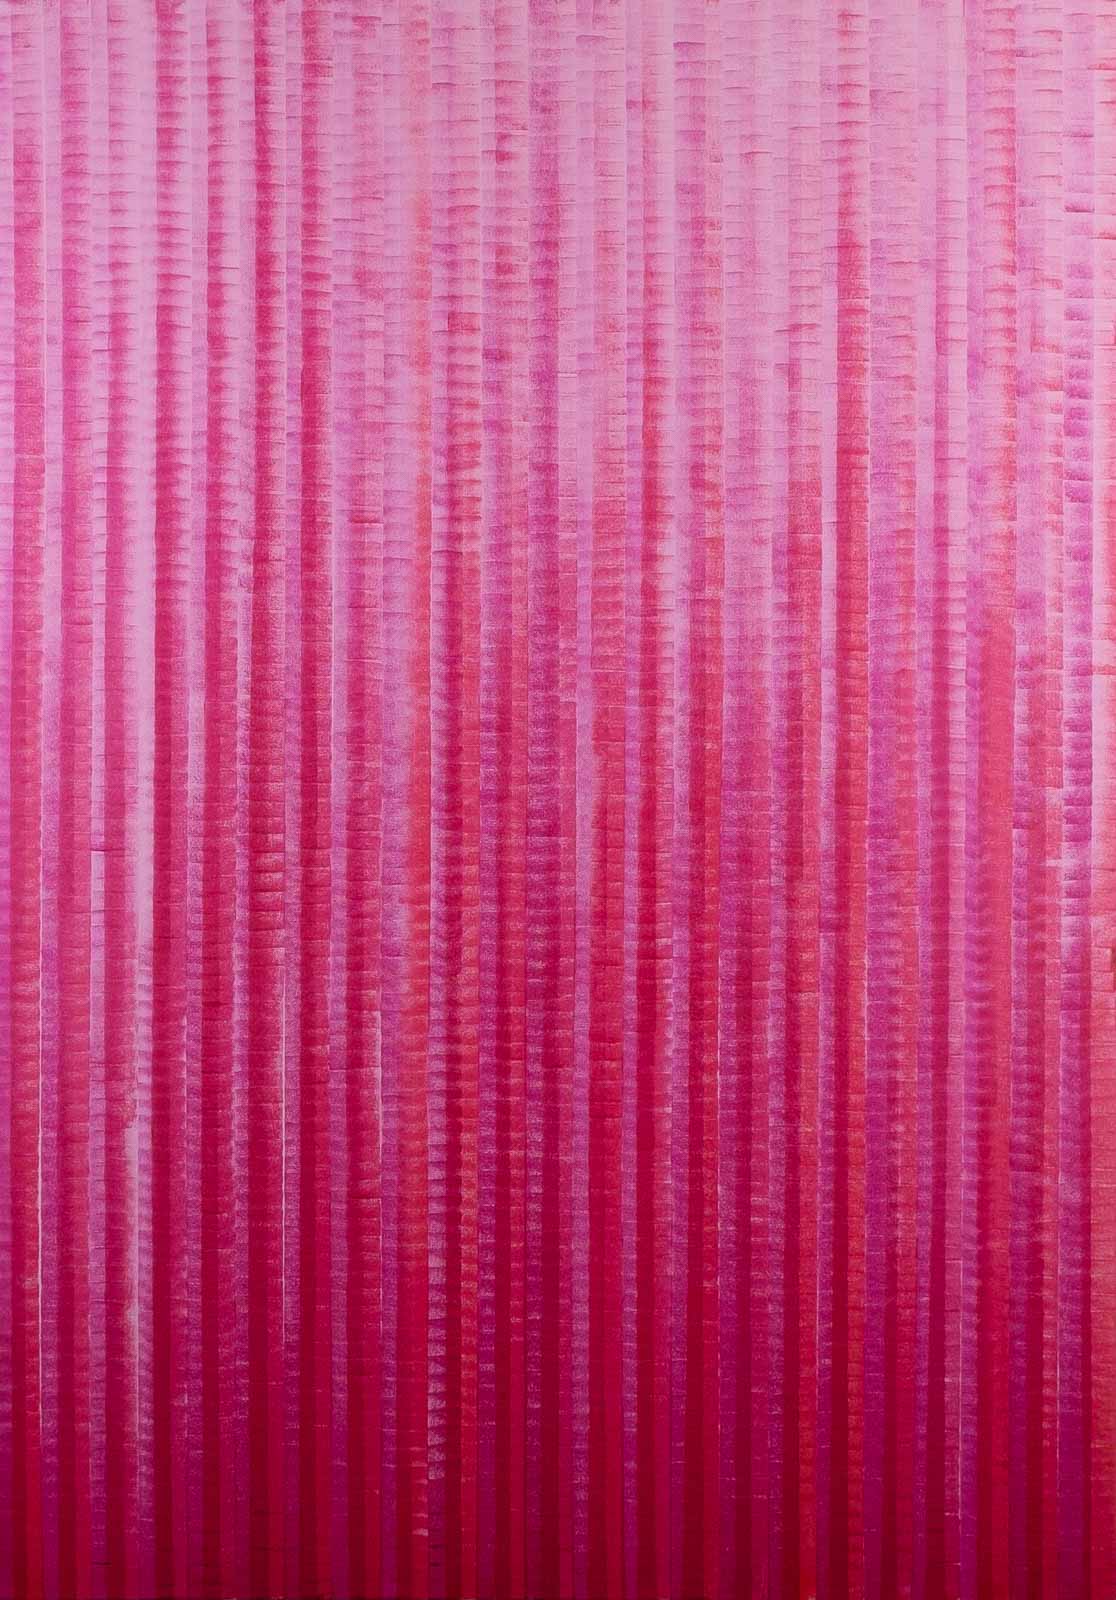 RED AND PINK - Acrylic on canvas - Format 100X70